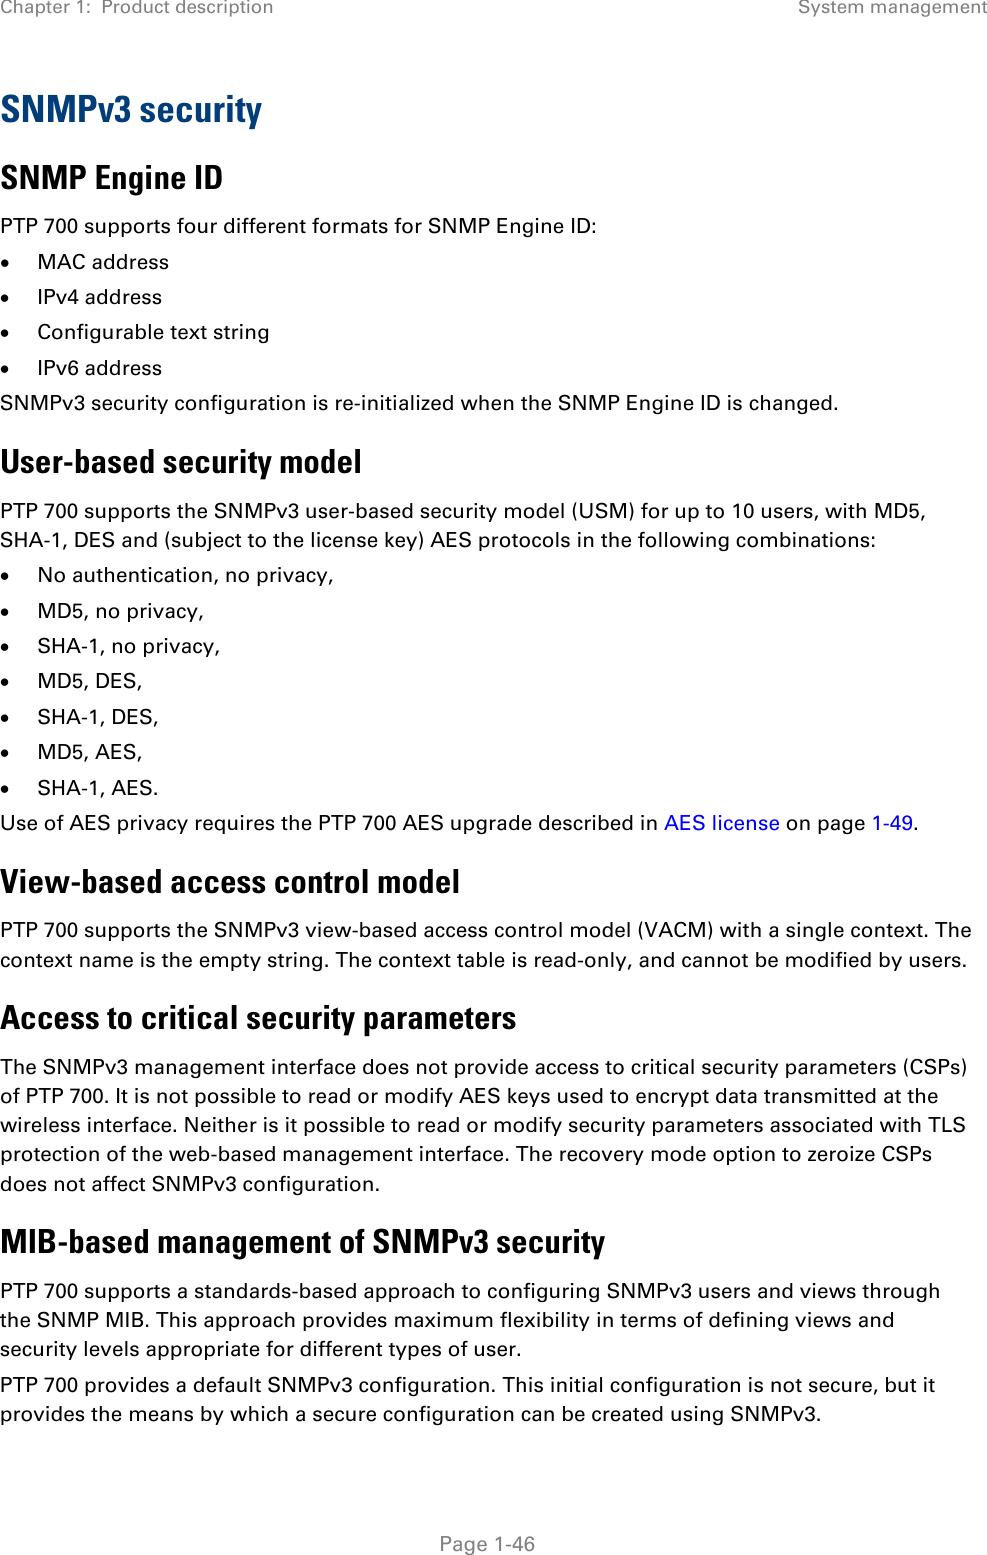 Chapter 1:  Product description System management  SNMPv3 security SNMP Engine ID PTP 700 supports four different formats for SNMP Engine ID: • MAC address • IPv4 address • Configurable text string • IPv6 address SNMPv3 security configuration is re-initialized when the SNMP Engine ID is changed. User-based security model PTP 700 supports the SNMPv3 user-based security model (USM) for up to 10 users, with MD5, SHA-1, DES and (subject to the license key) AES protocols in the following combinations: • No authentication, no privacy, • MD5, no privacy, • SHA-1, no privacy, • MD5, DES, • SHA-1, DES, • MD5, AES, • SHA-1, AES. Use of AES privacy requires the PTP 700 AES upgrade described in AES license on page 1-49. View-based access control model PTP 700 supports the SNMPv3 view-based access control model (VACM) with a single context. The context name is the empty string. The context table is read-only, and cannot be modified by users.  Access to critical security parameters The SNMPv3 management interface does not provide access to critical security parameters (CSPs) of PTP 700. It is not possible to read or modify AES keys used to encrypt data transmitted at the wireless interface. Neither is it possible to read or modify security parameters associated with TLS protection of the web-based management interface. The recovery mode option to zeroize CSPs does not affect SNMPv3 configuration. MIB-based management of SNMPv3 security PTP 700 supports a standards-based approach to configuring SNMPv3 users and views through the SNMP MIB. This approach provides maximum flexibility in terms of defining views and security levels appropriate for different types of user. PTP 700 provides a default SNMPv3 configuration. This initial configuration is not secure, but it provides the means by which a secure configuration can be created using SNMPv3.  Page 1-46 